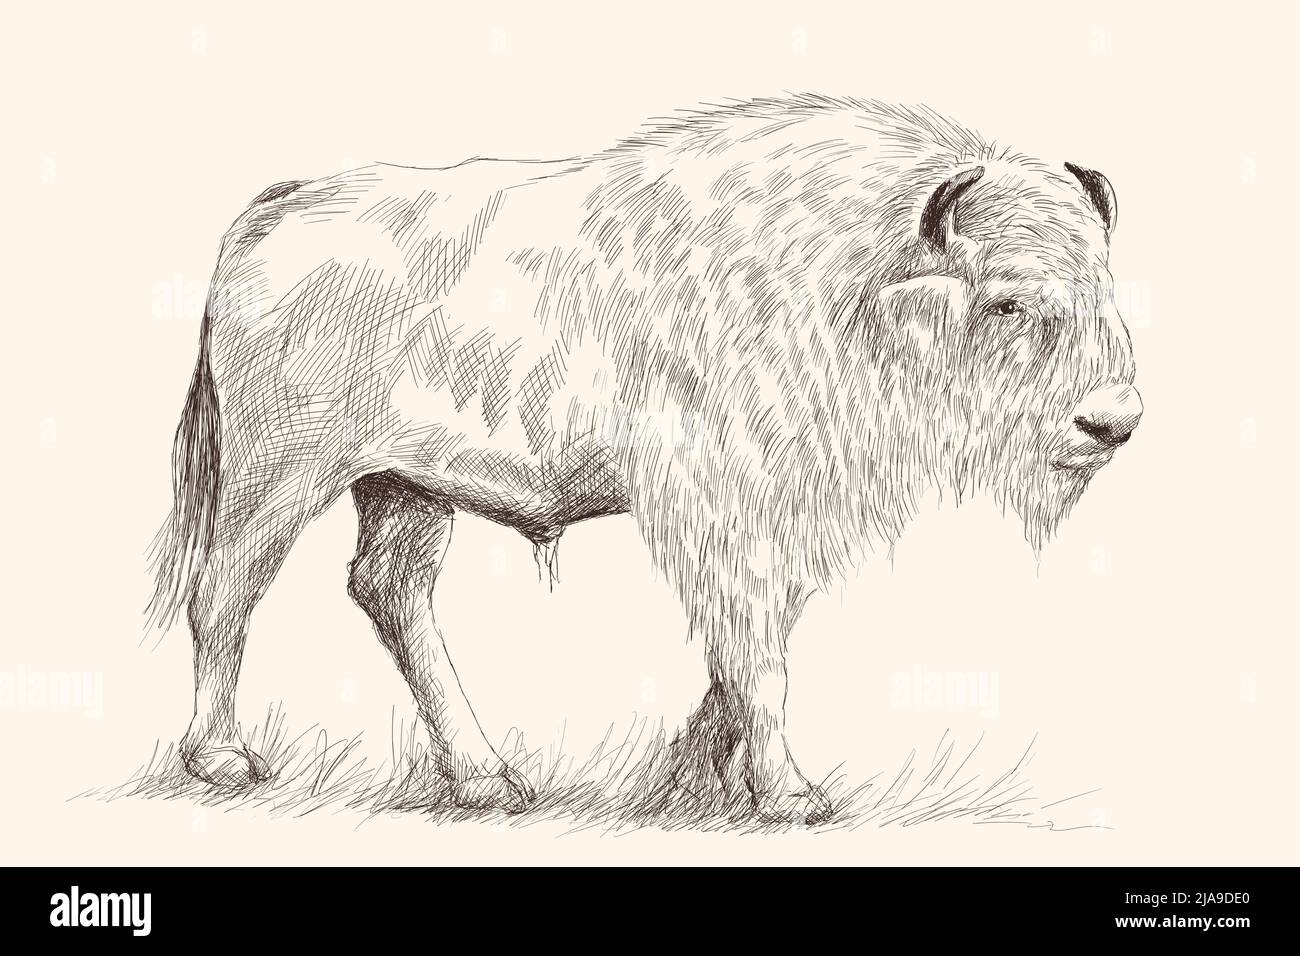 A large old bison stands on its feet in the grass. Pencil hand drawing sketch on a beige background. Stock Vector